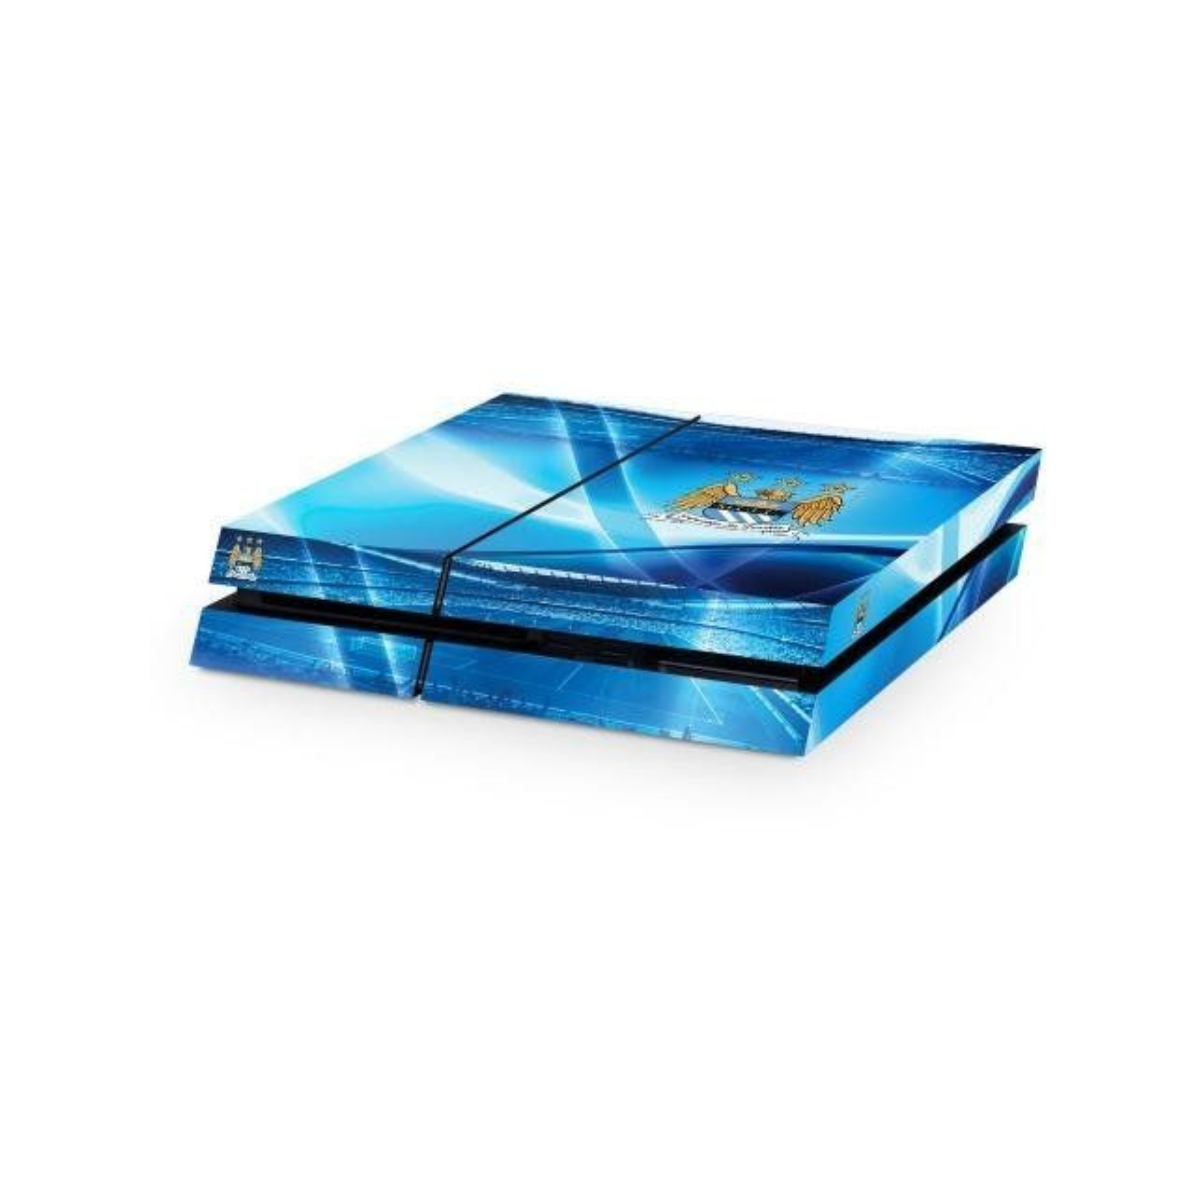 inToro Manchester City FC Skin for PlayStation 4 Console